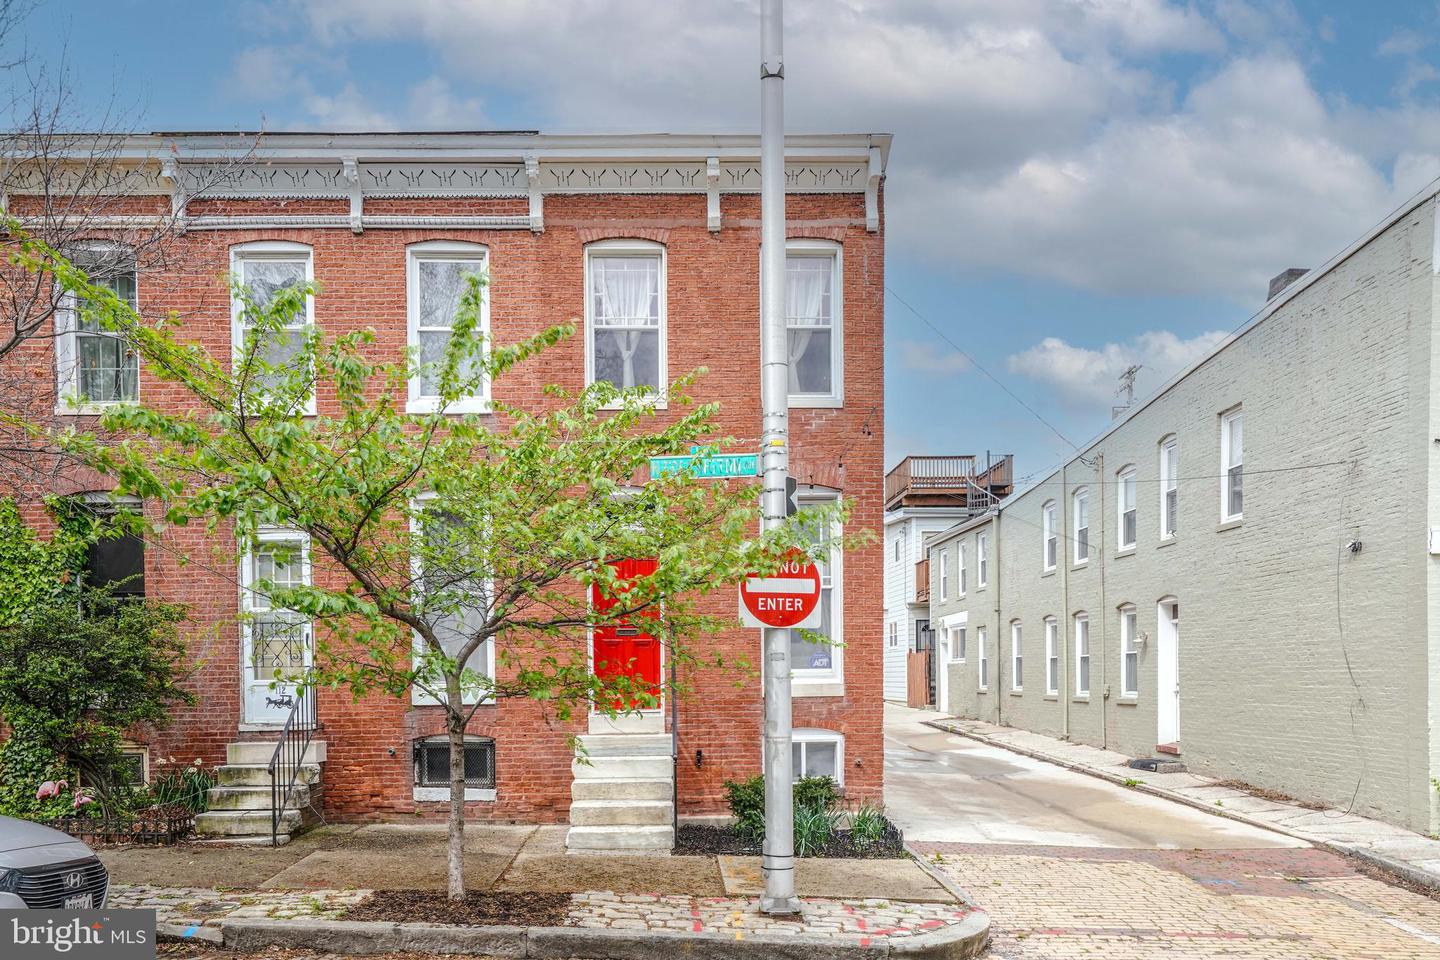 View Baltimore, MD 21231 townhome